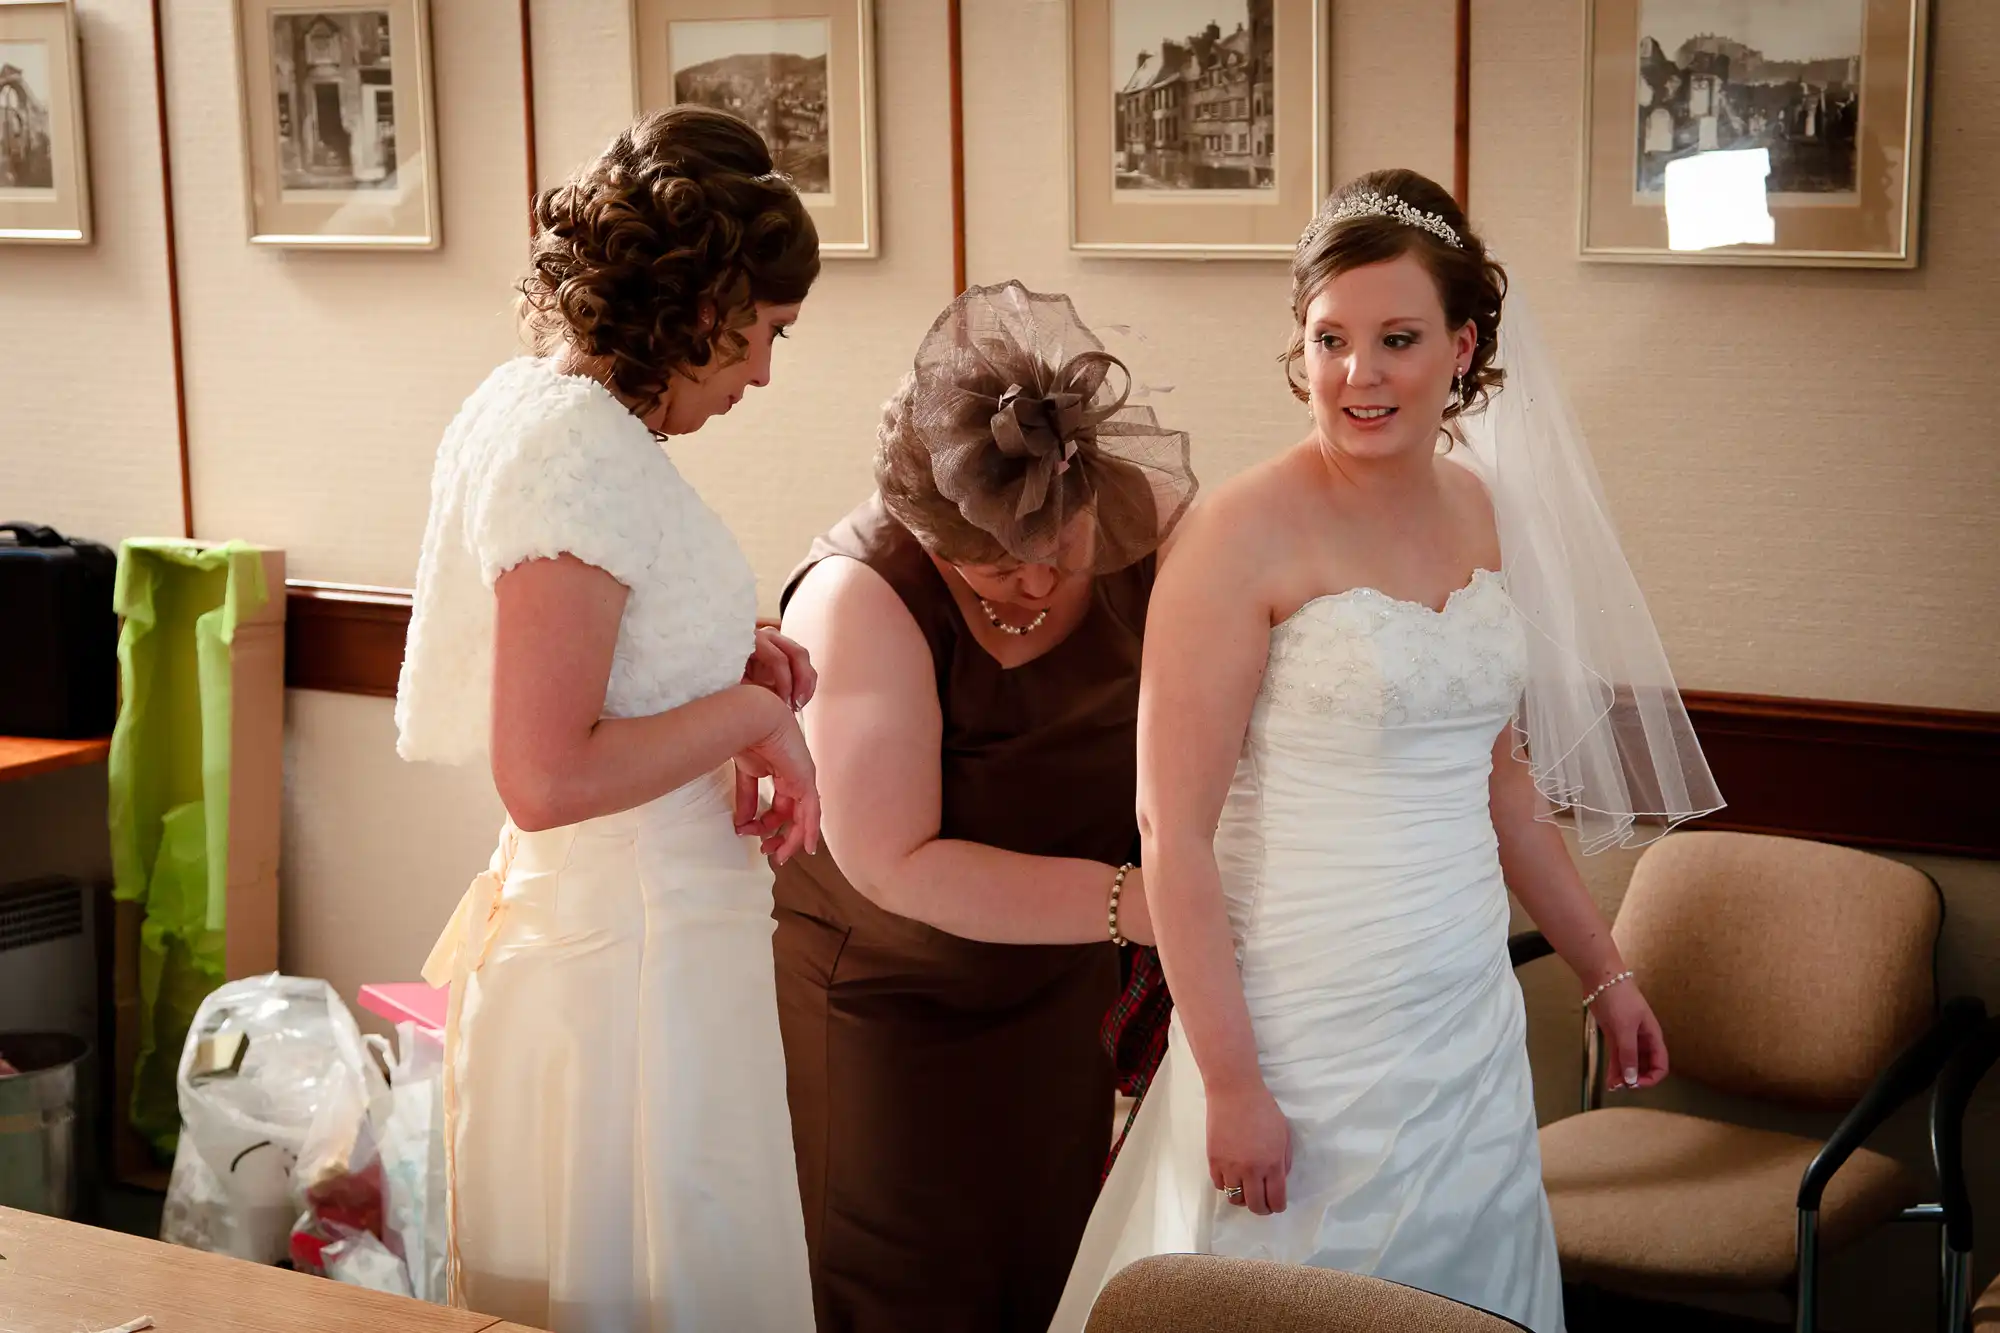 Two women adjusting a bride's wedding dress in a room, with emotional expressions on their faces.